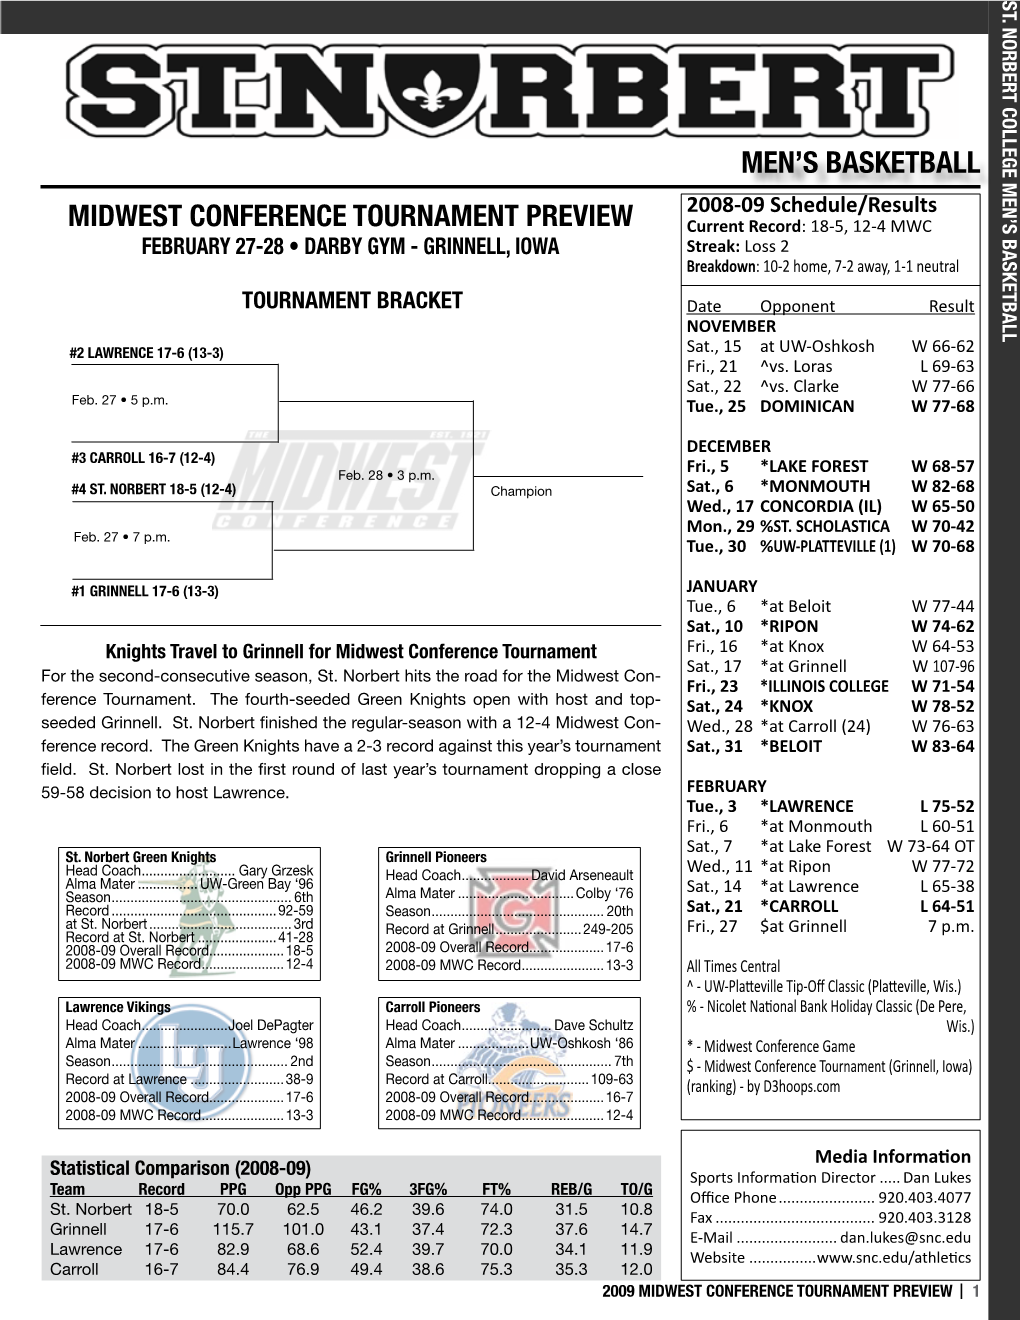 Men's Basketball Midwest Conference Tournament